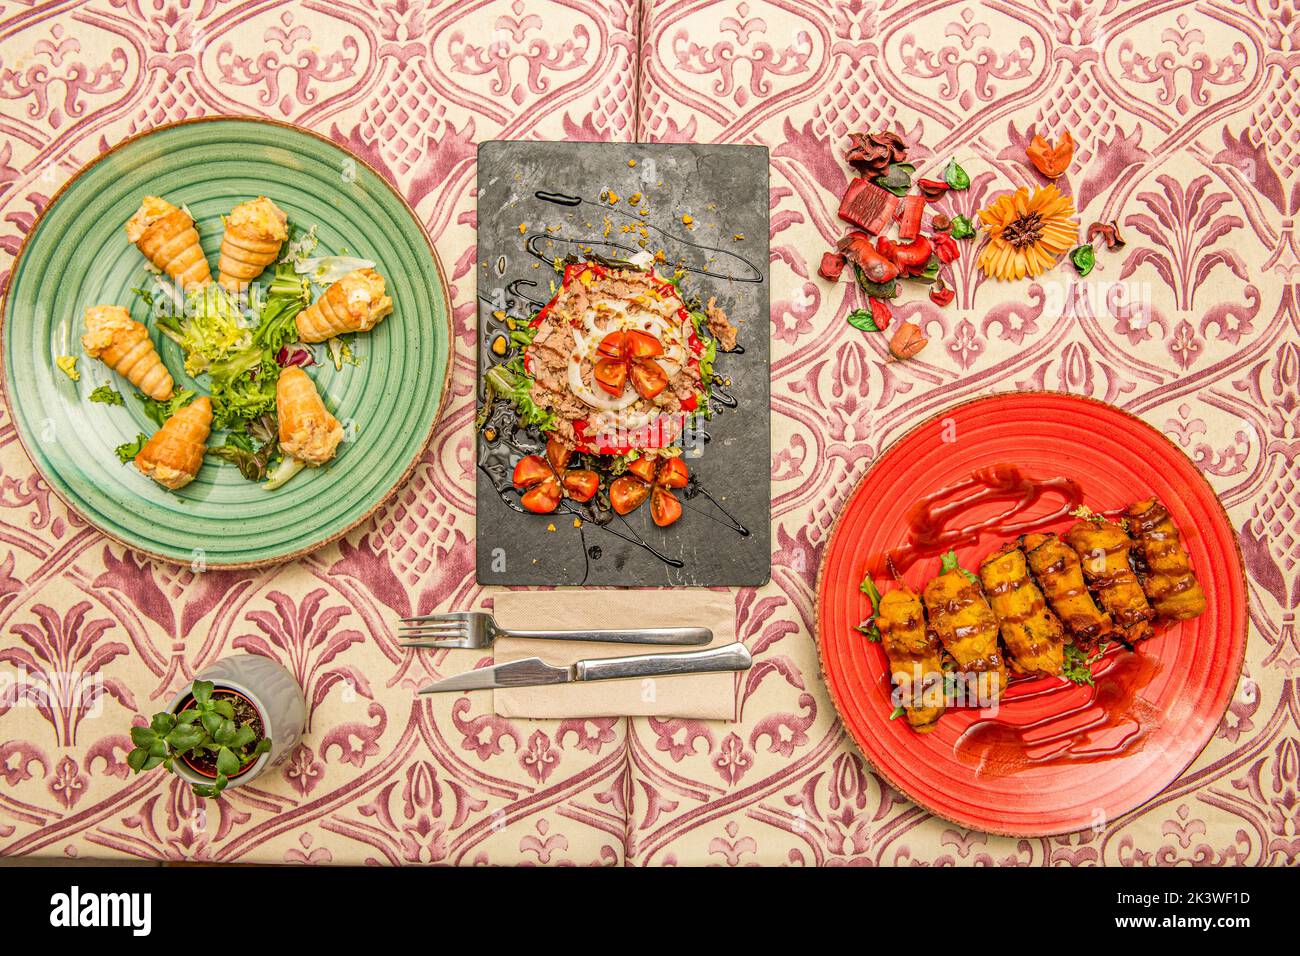 Several plates of food with croquettes, cones with salad and Russian salad with tomato and canned tuna Stock Photo